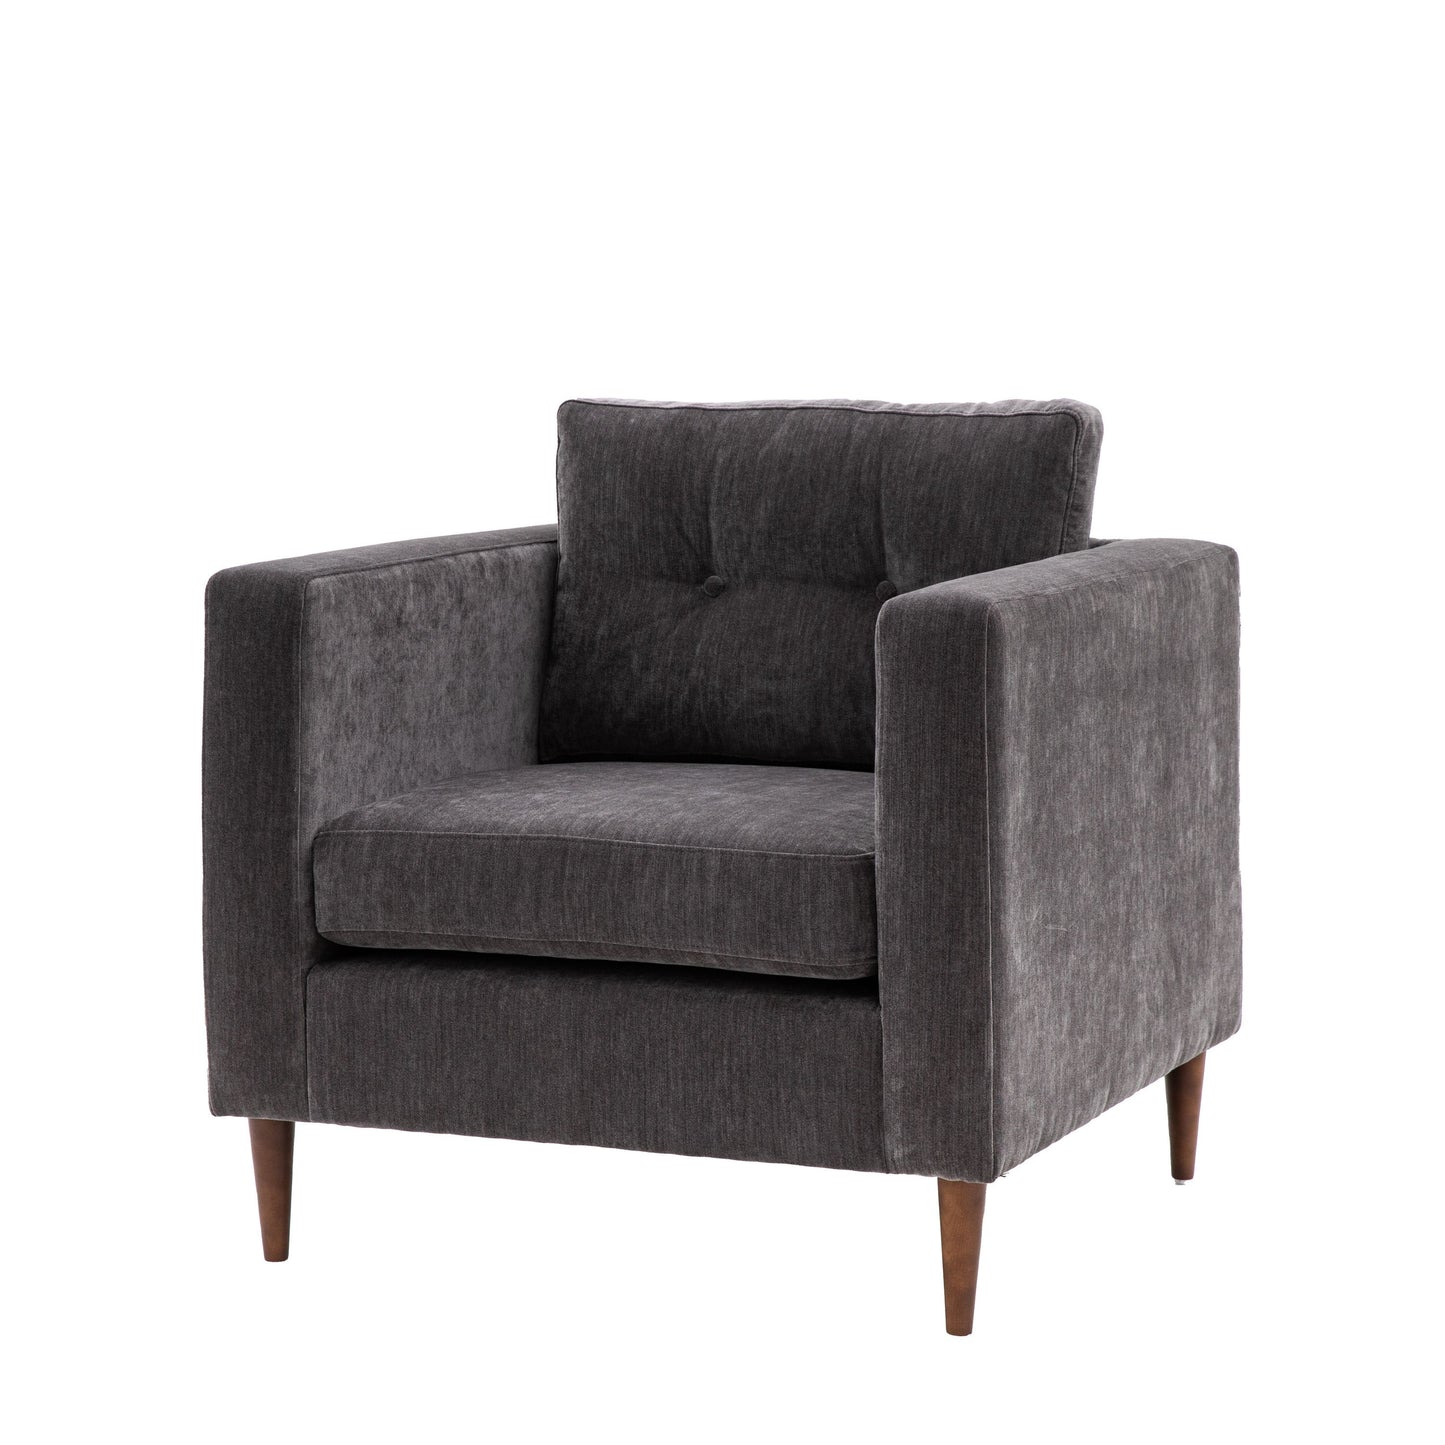 Harlow Armchair in Charcoal